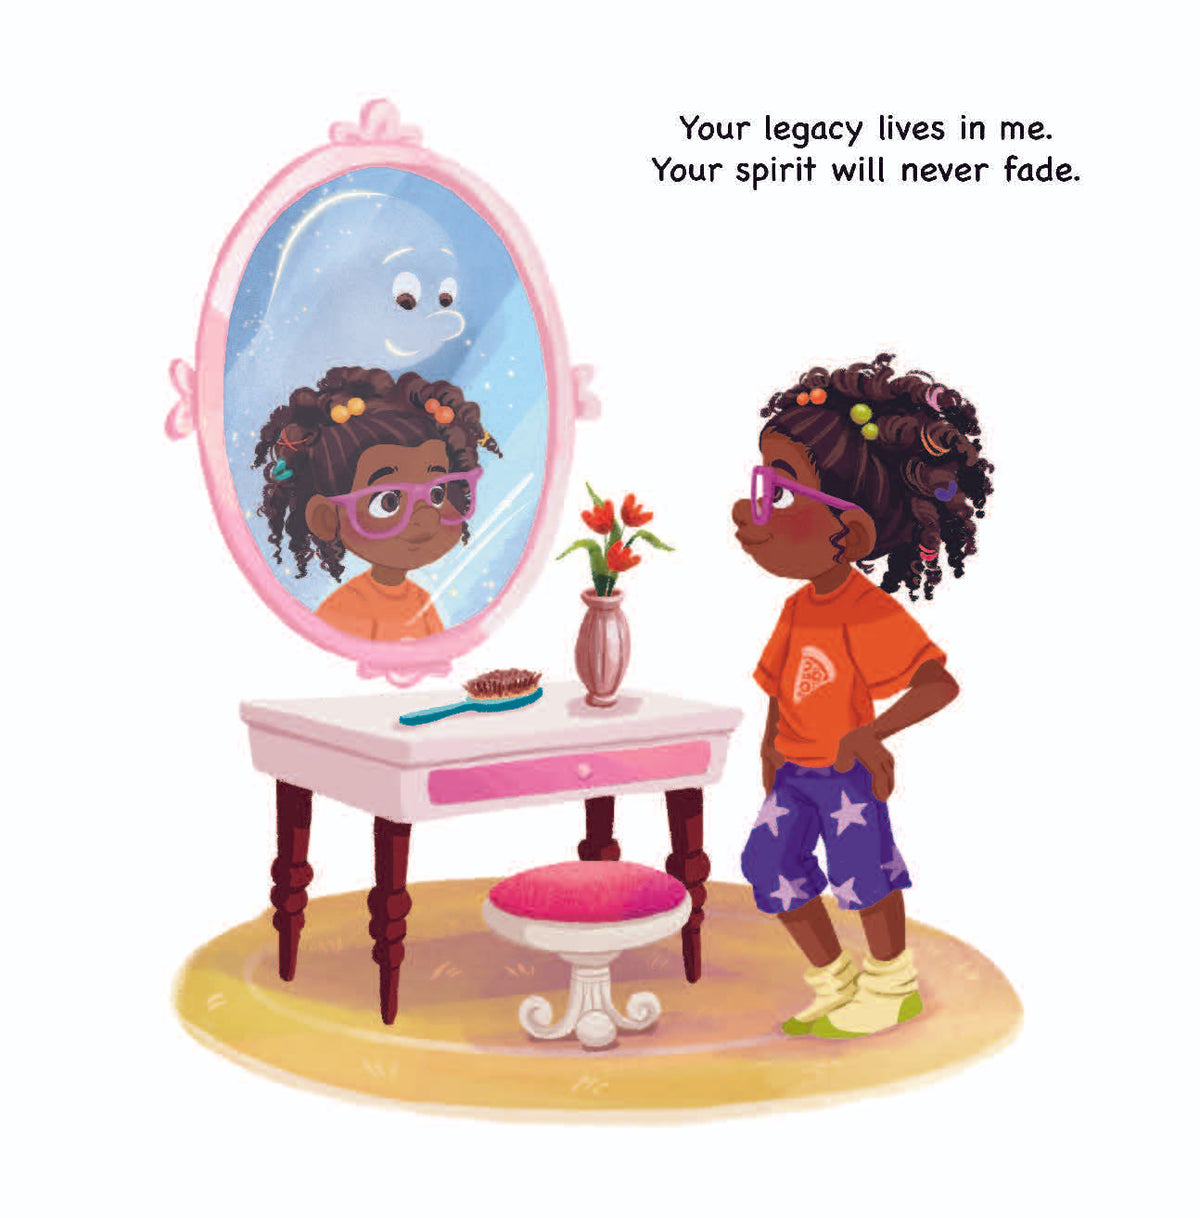 Always There: A Children's Book About Healing From Grief - Author Krystaelynne Sanders Diggs [Body Safety]